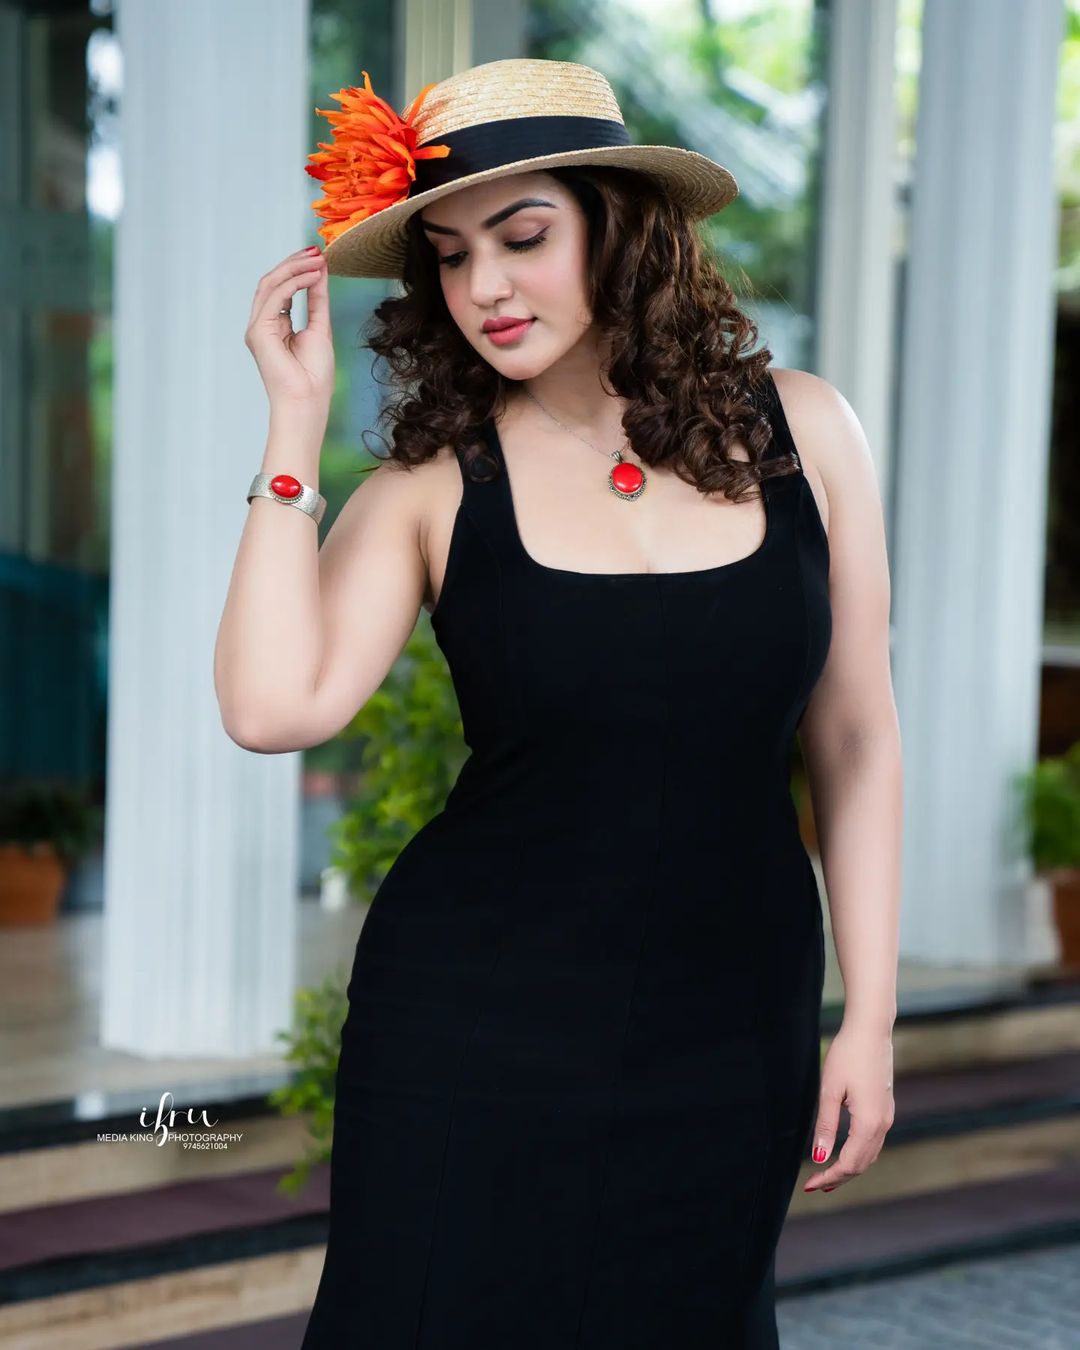 Honey Rose Looking Fabulous in Black Outfit